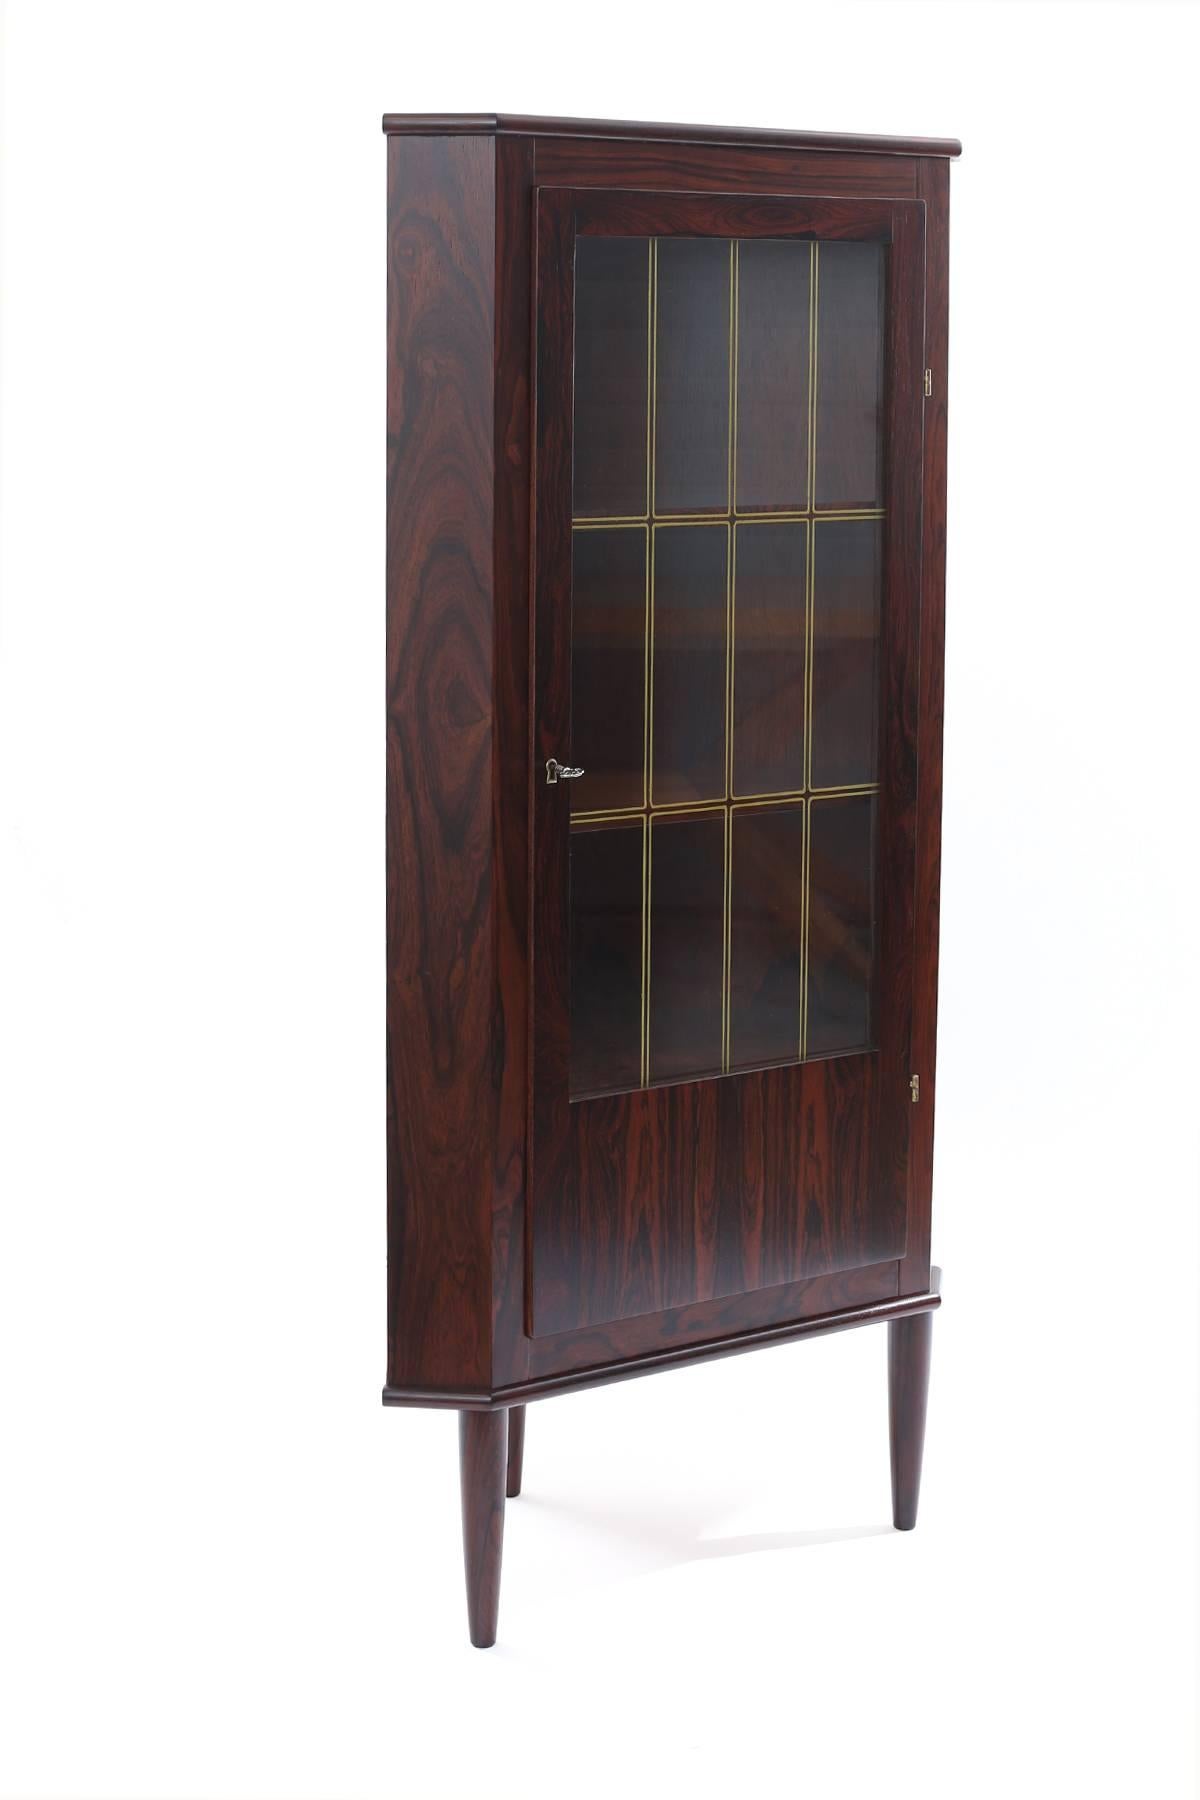 Brazilian rosewood and glass corner chest from Denmark, circa mid-1960s. This example has a beautifully grained rosewood case, inset glass in the door and three interior shelves. The tapered legs are solid rosewood. This has been newly and